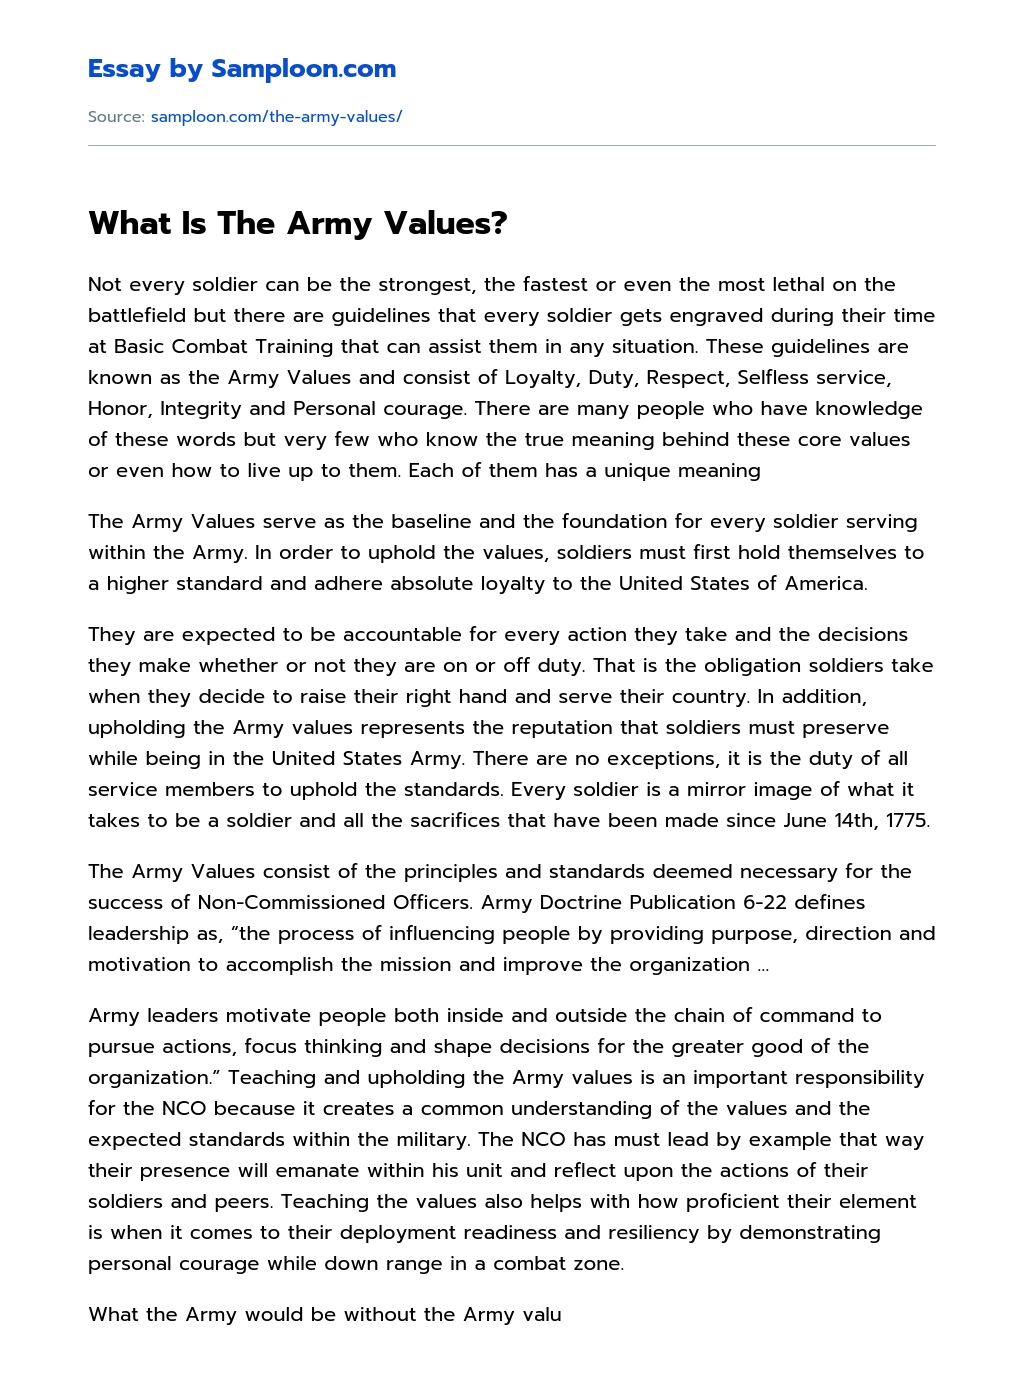 What Is The Army Values? essay